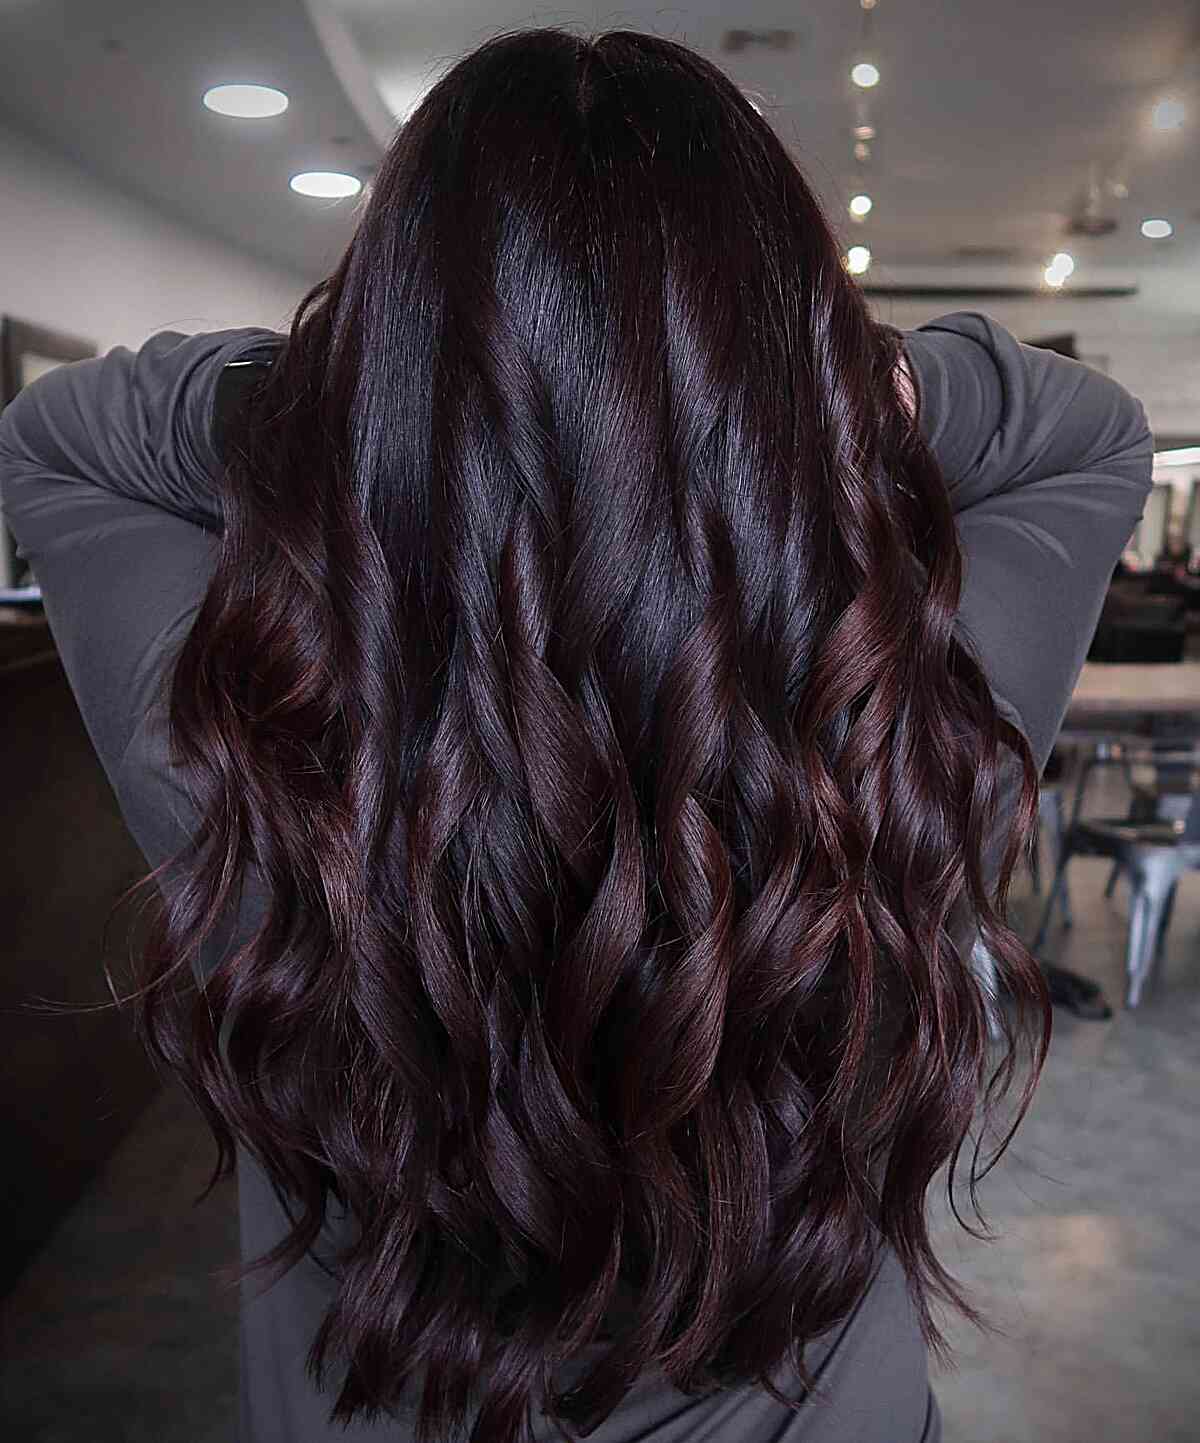 Dark Caramel Brunette with Highlights on long hair with barrel curls